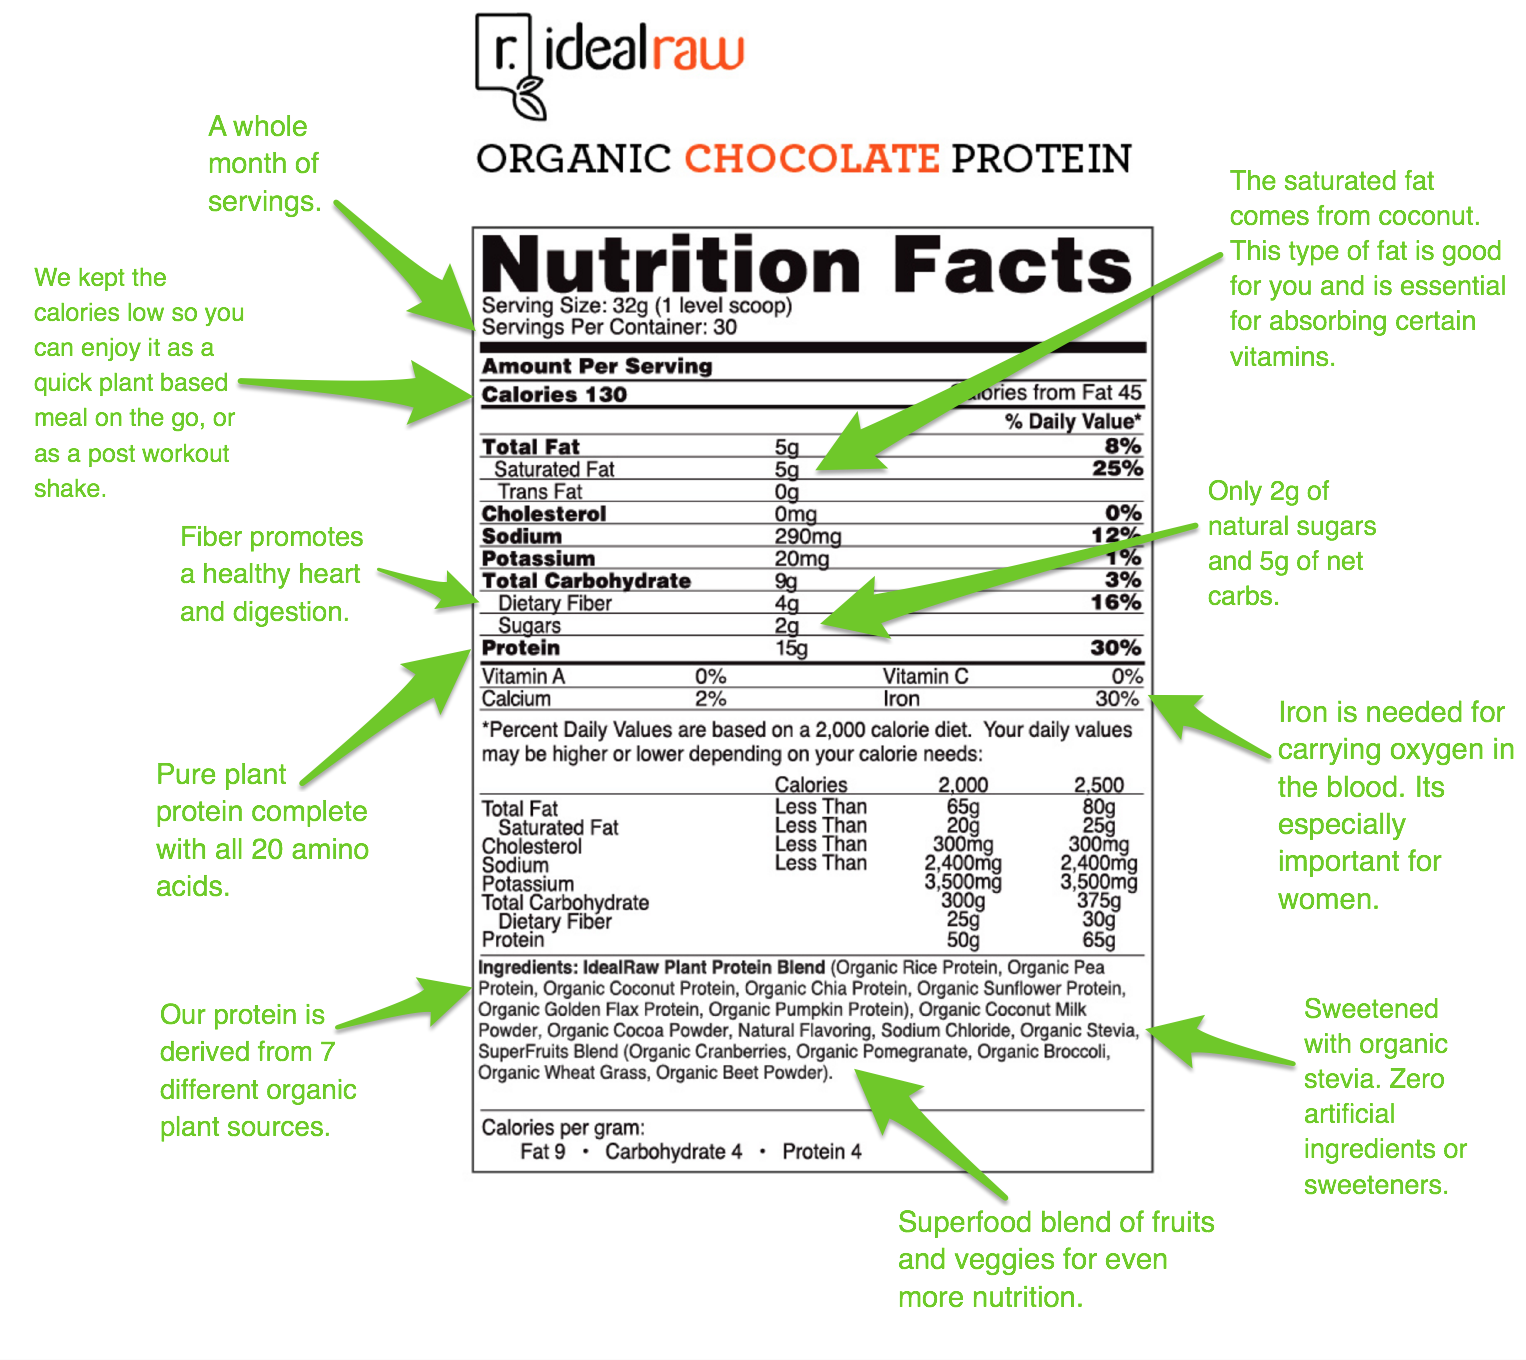 idealraw nutrition facts benefits